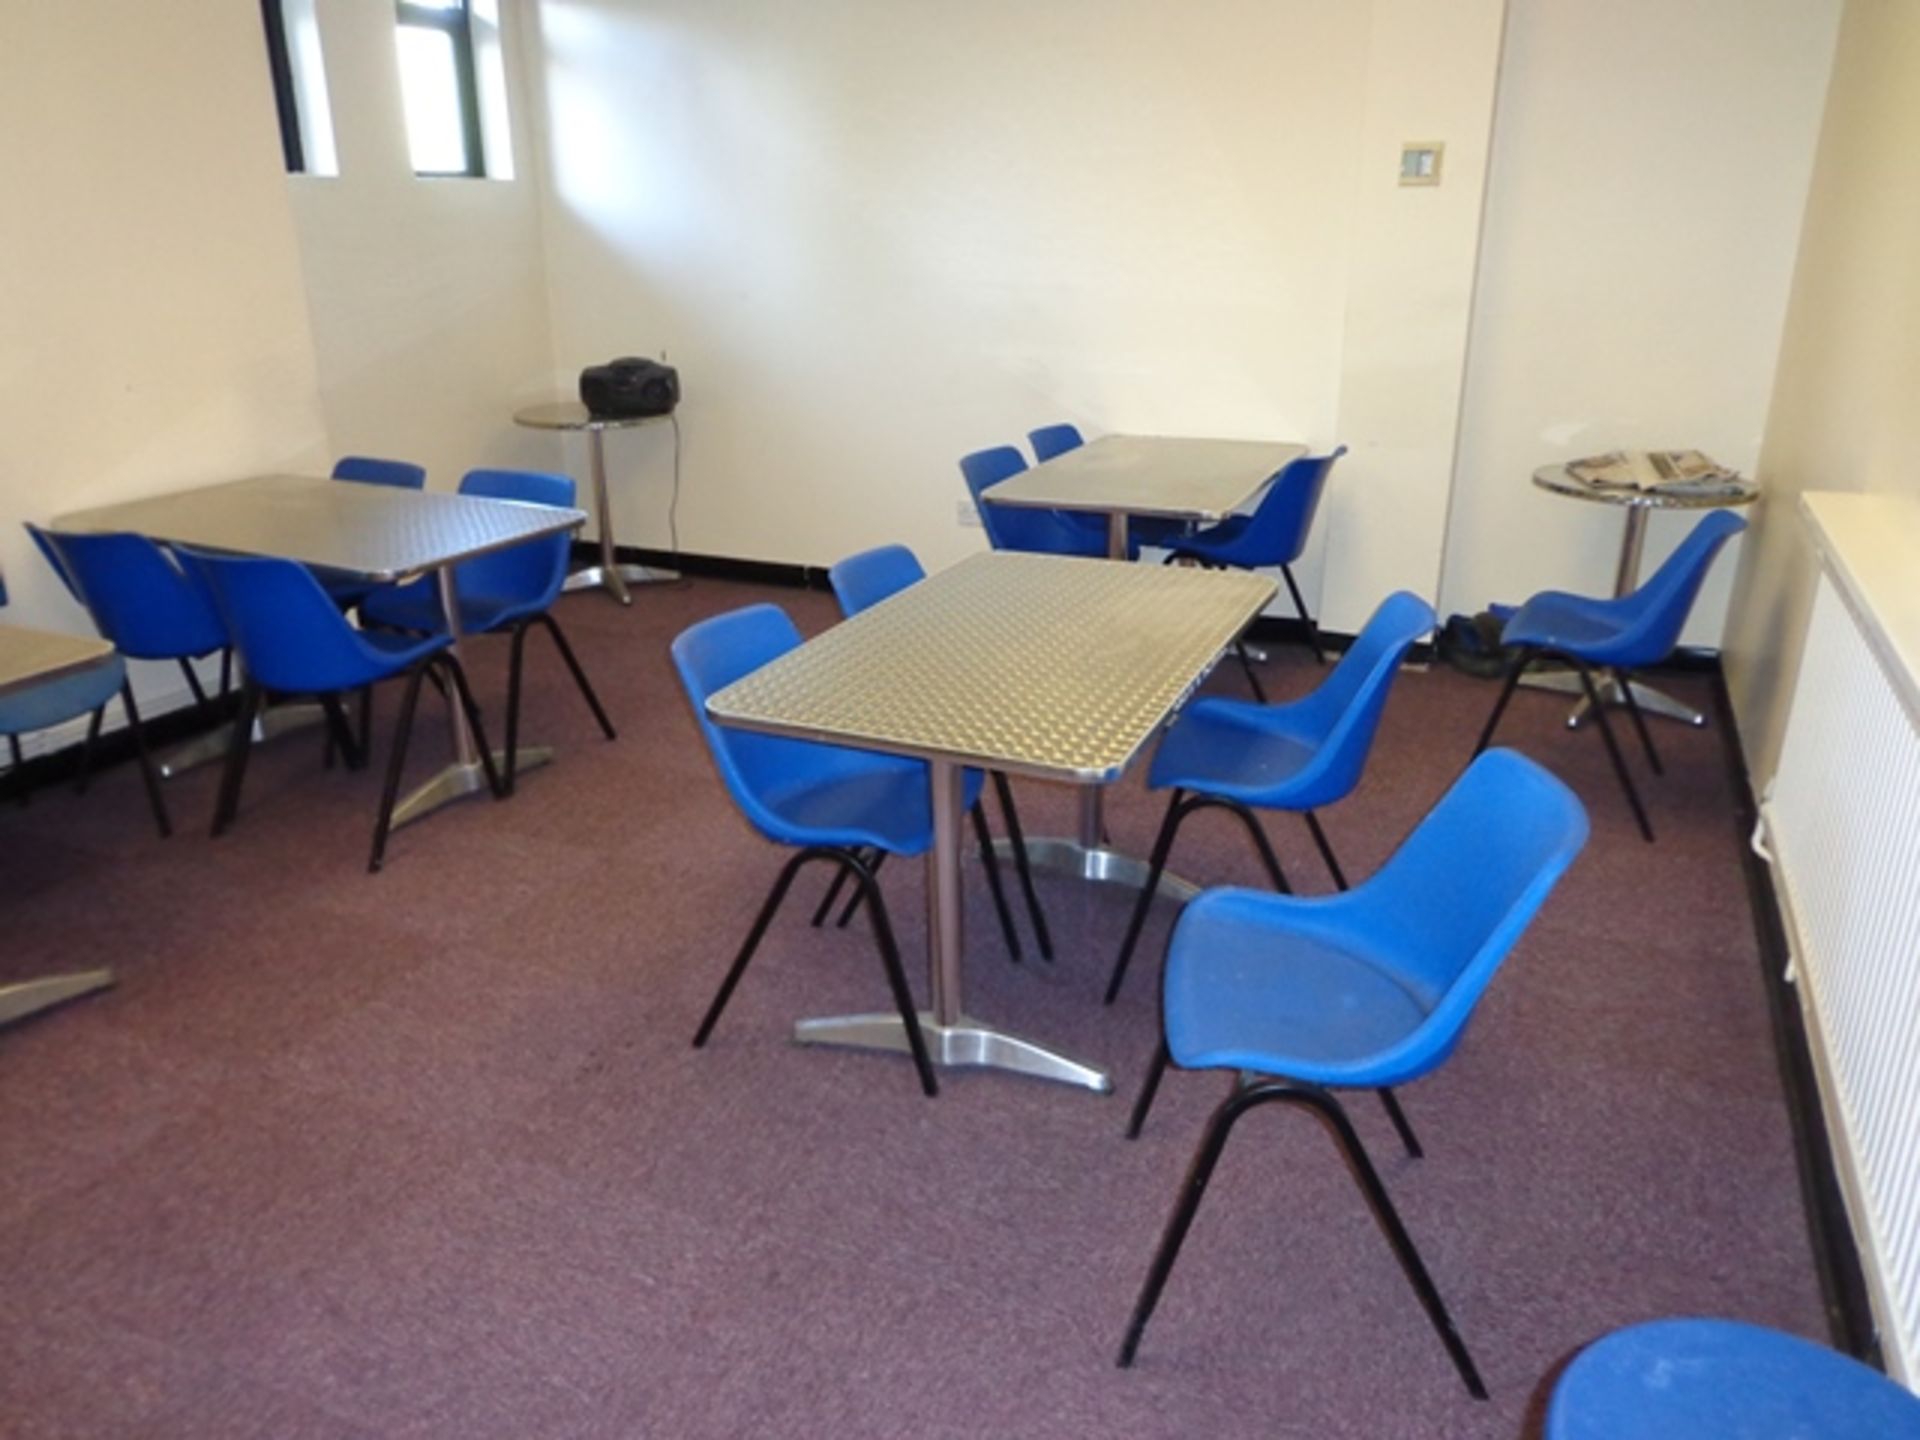 Contents to Room including Tables, Chairs and Changing Benches